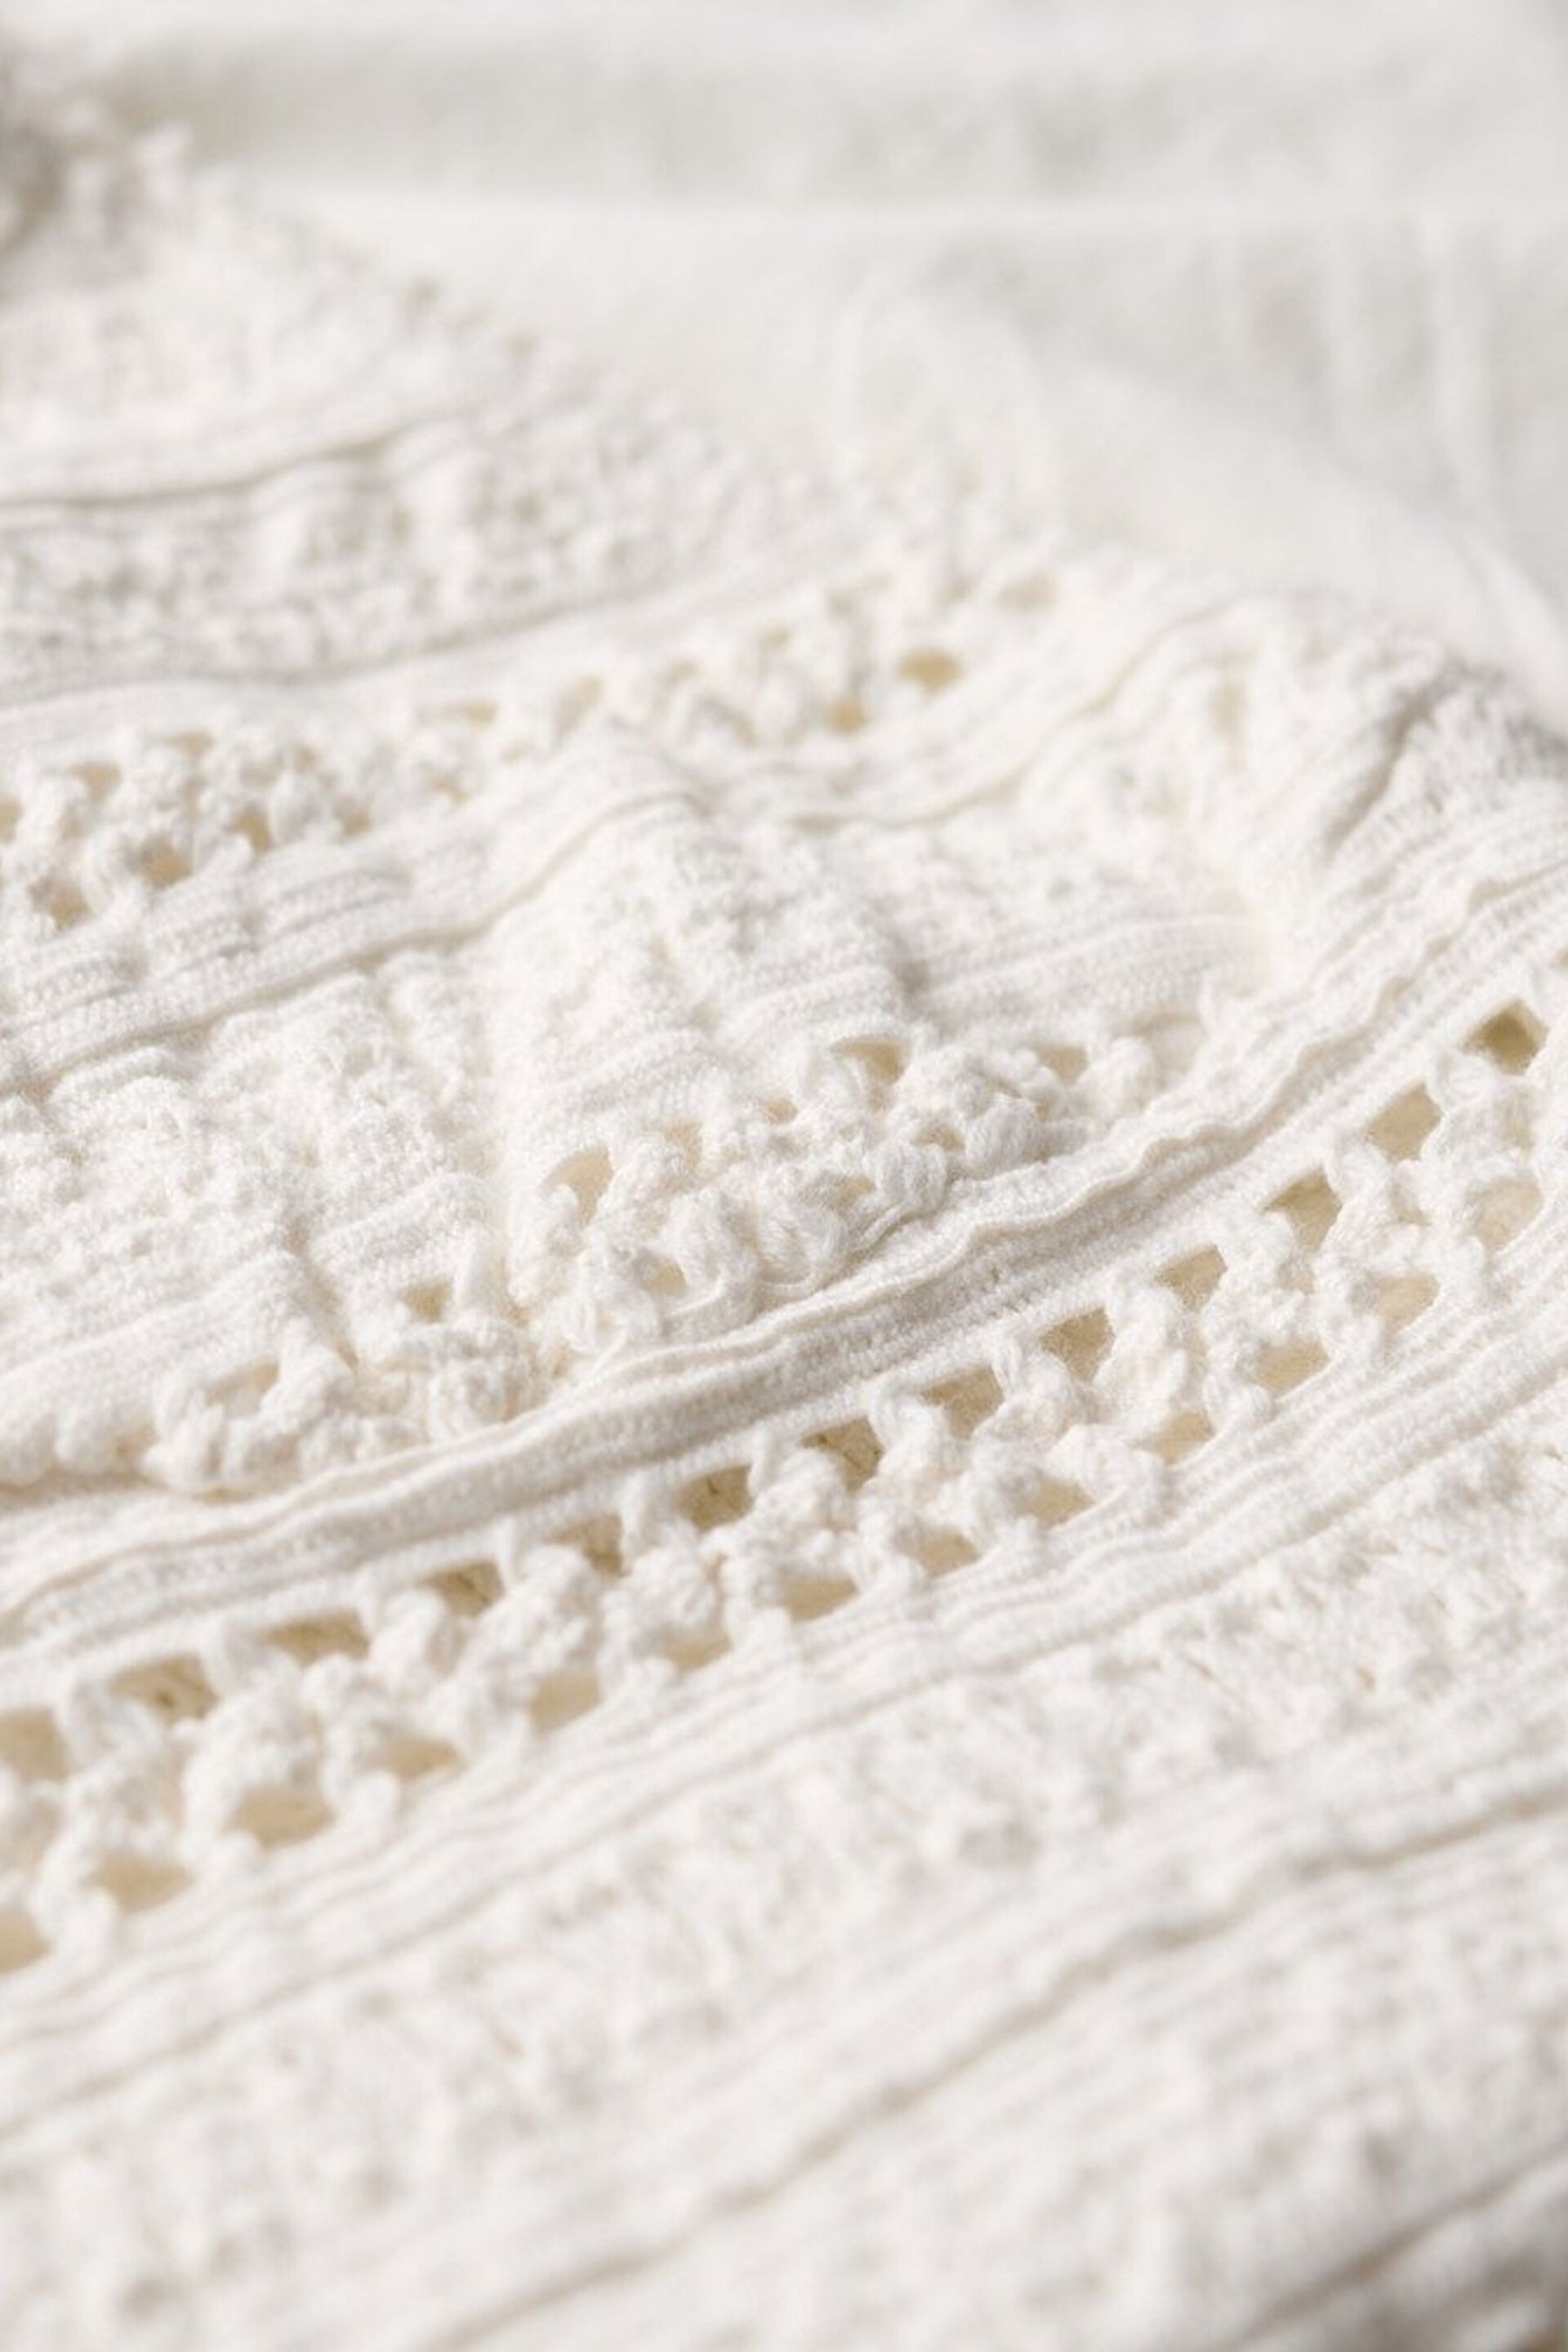 Superdry White Jersey Lace Mini Dress - Image 5 of 6